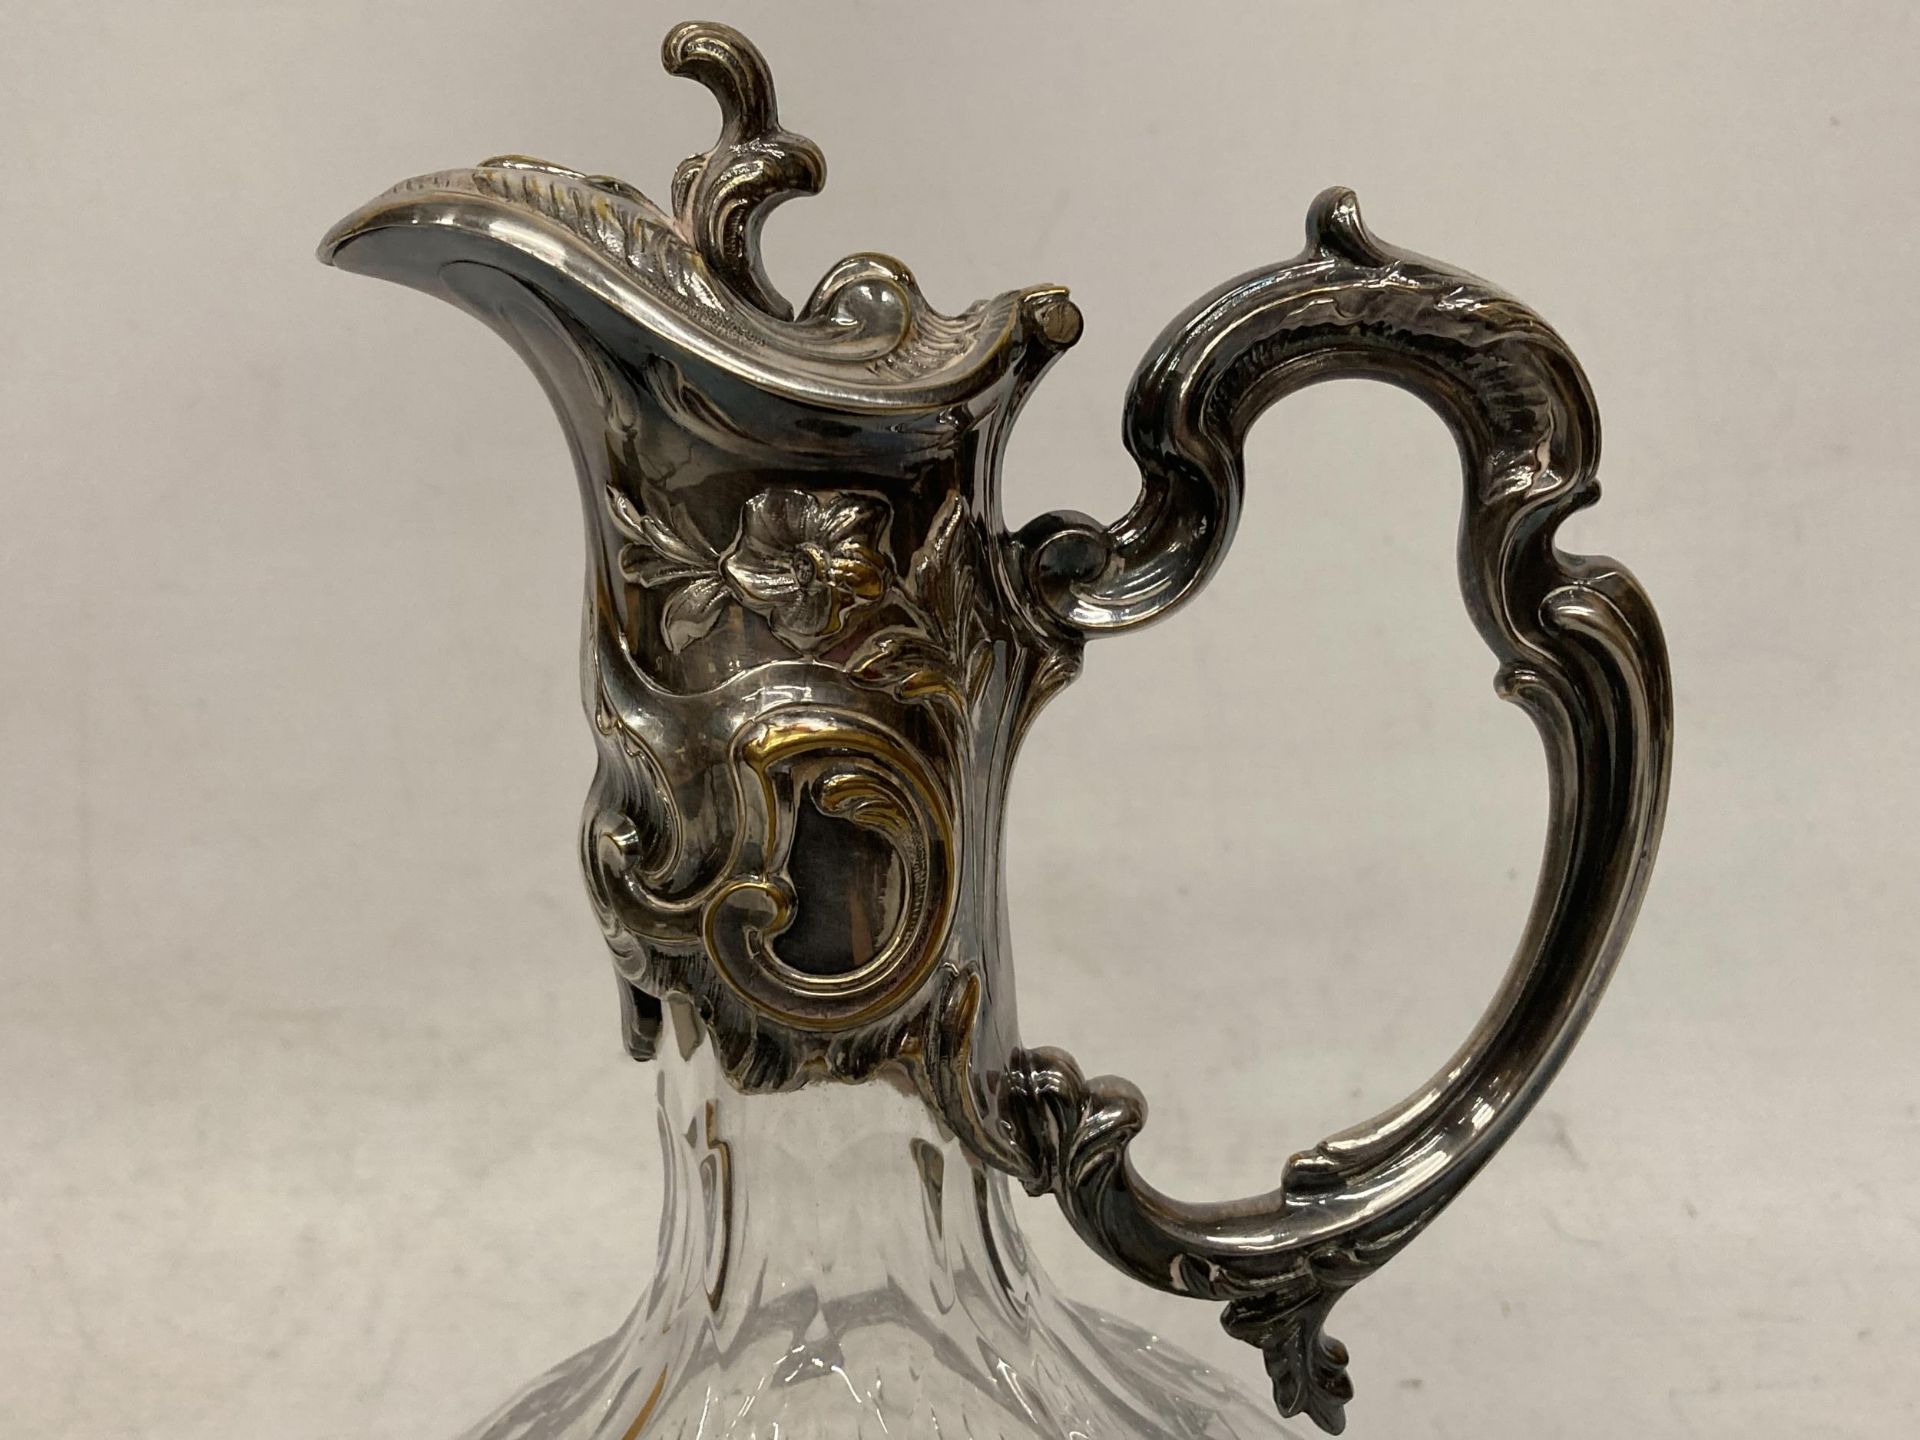 AN ORNATE SILVER PLATED AND CUT GLASS CLARET JUG - Image 6 of 6